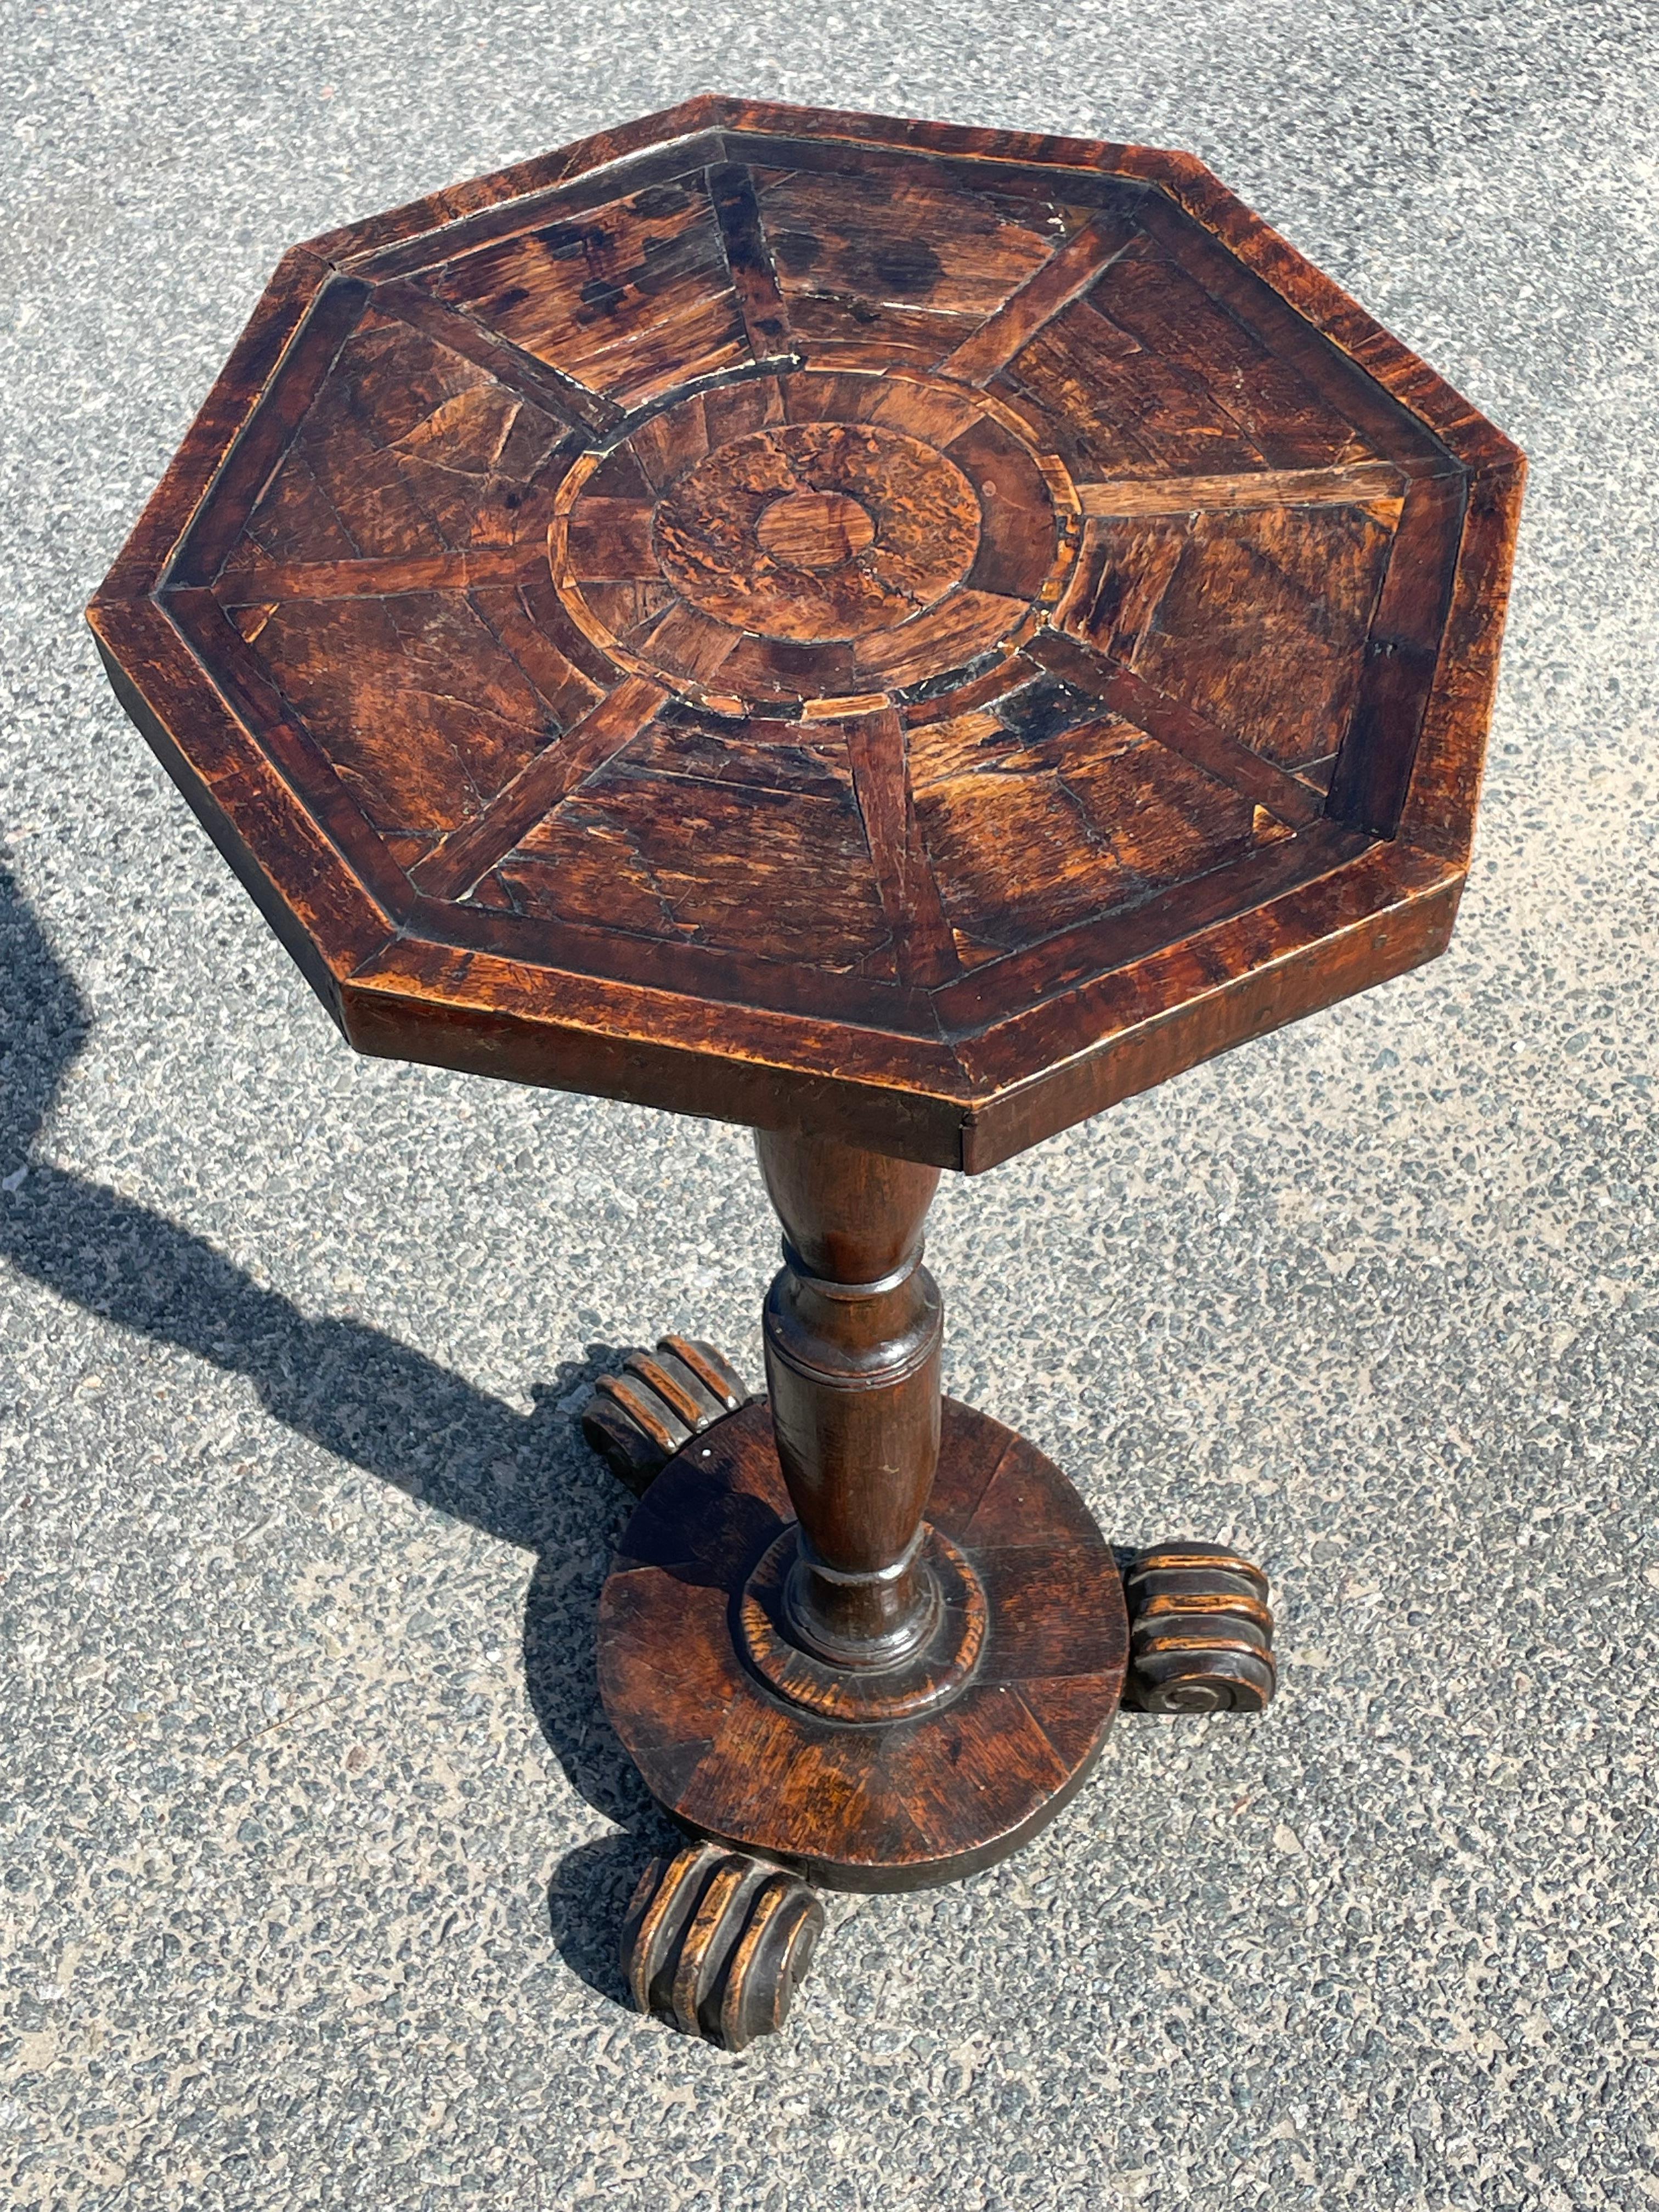 18th Century, English Oak Candle Stand with Inlaid Octagonal Top In Fair Condition For Sale In Nantucket, MA